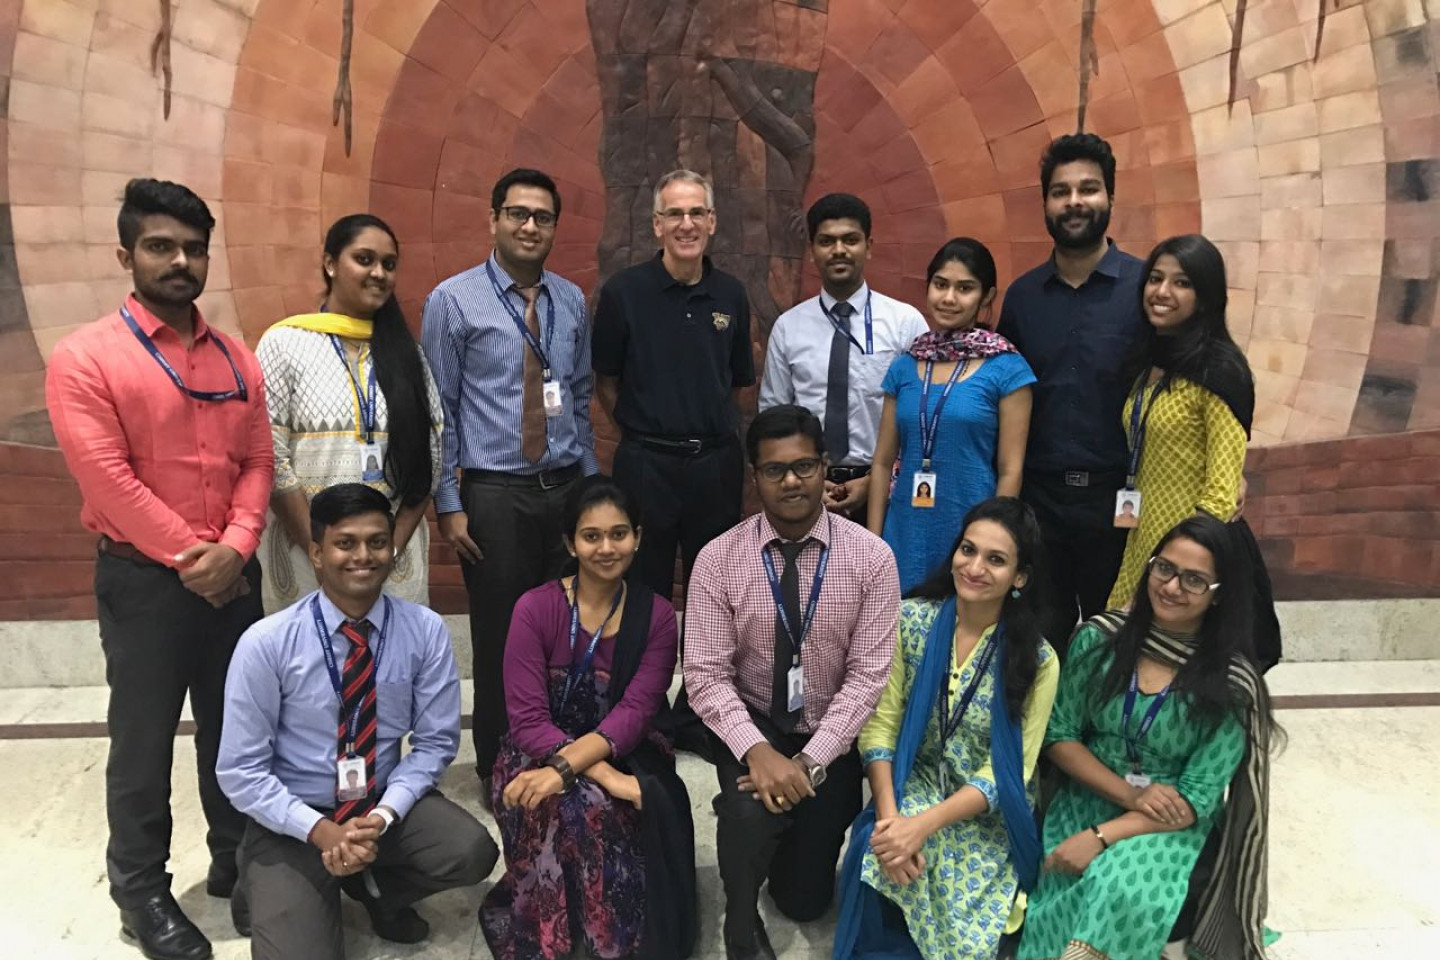 Dr. Tim Palmer stands with students on a study abroad trip in India.